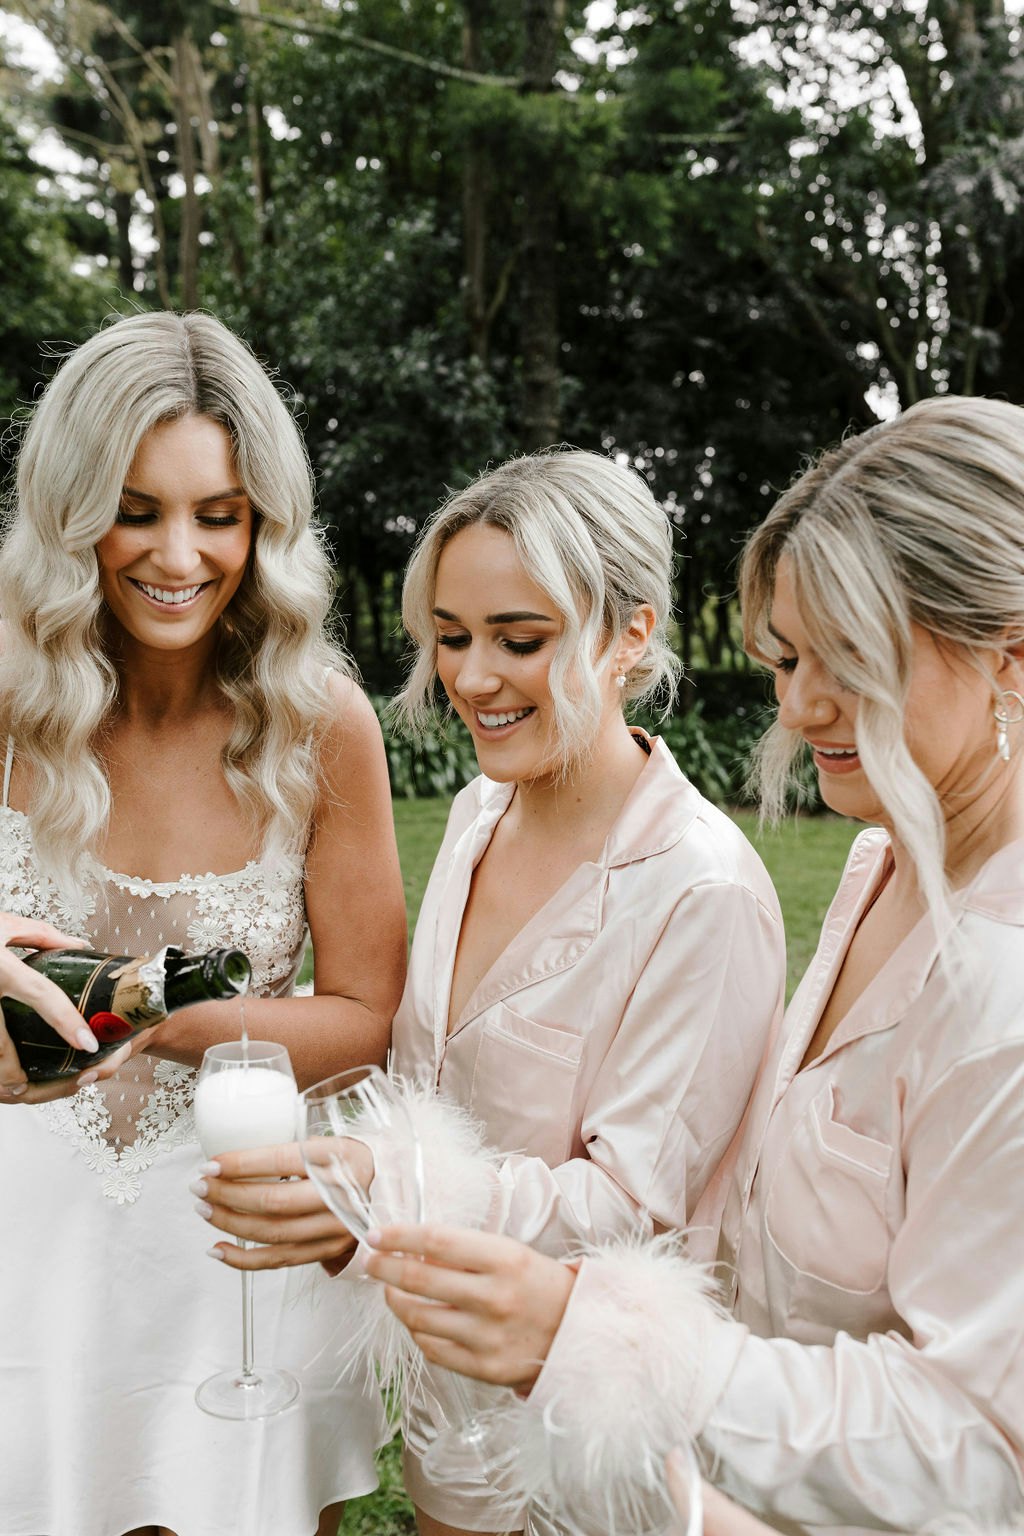 Bride pouring champagne with bridesmaids